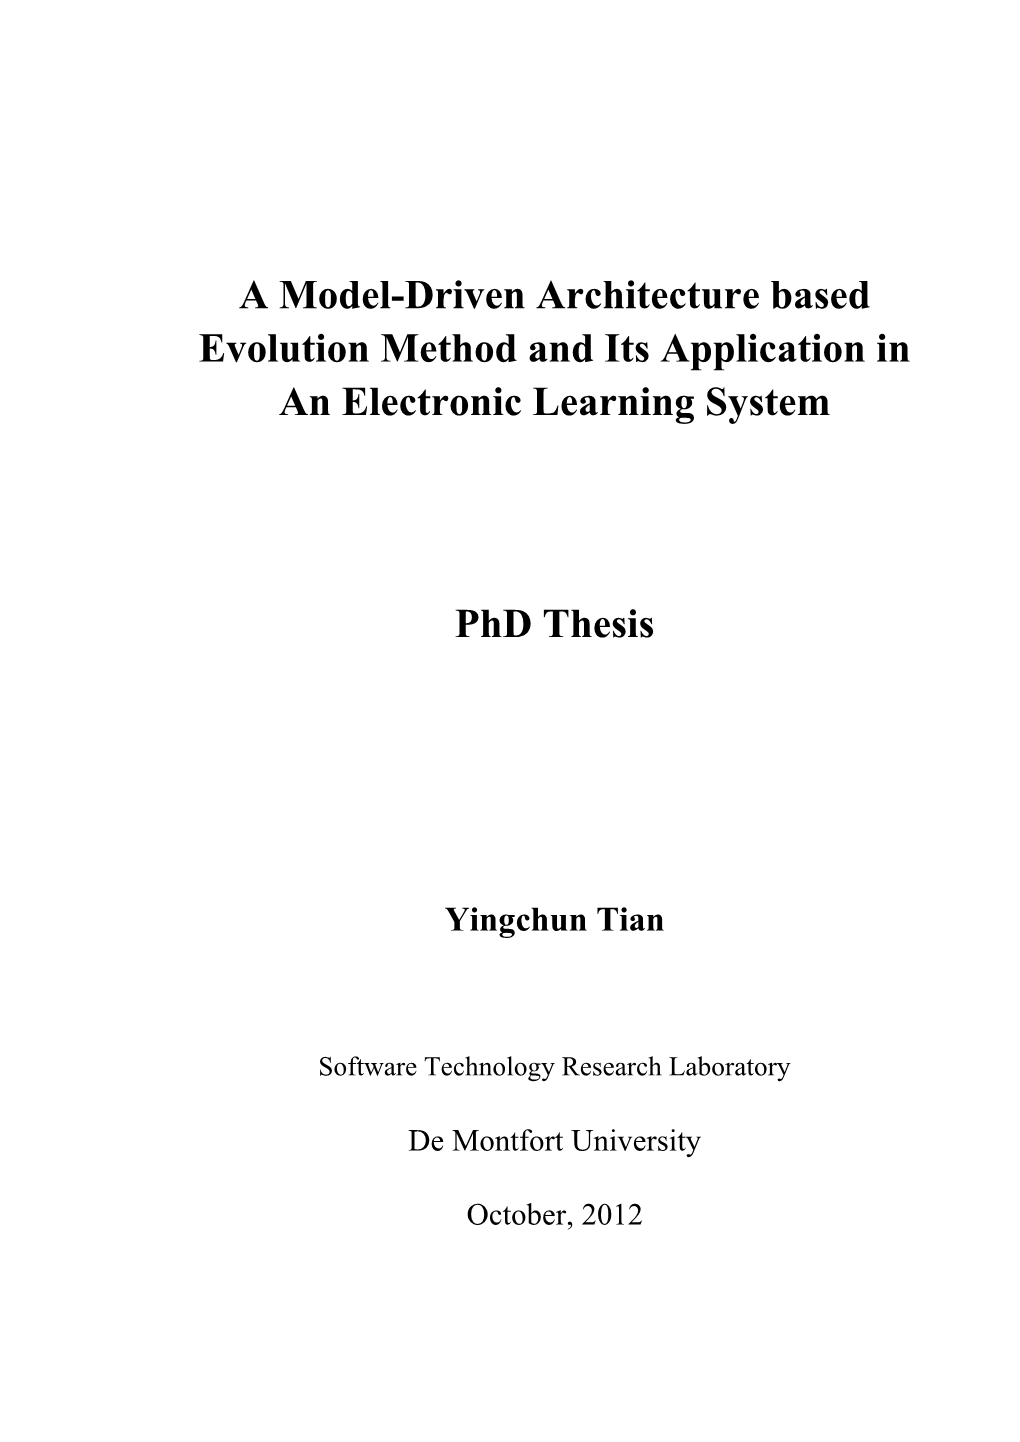 A Model-Driven Architecture Based Evolution Method and Its Application in an Electronic Learning System